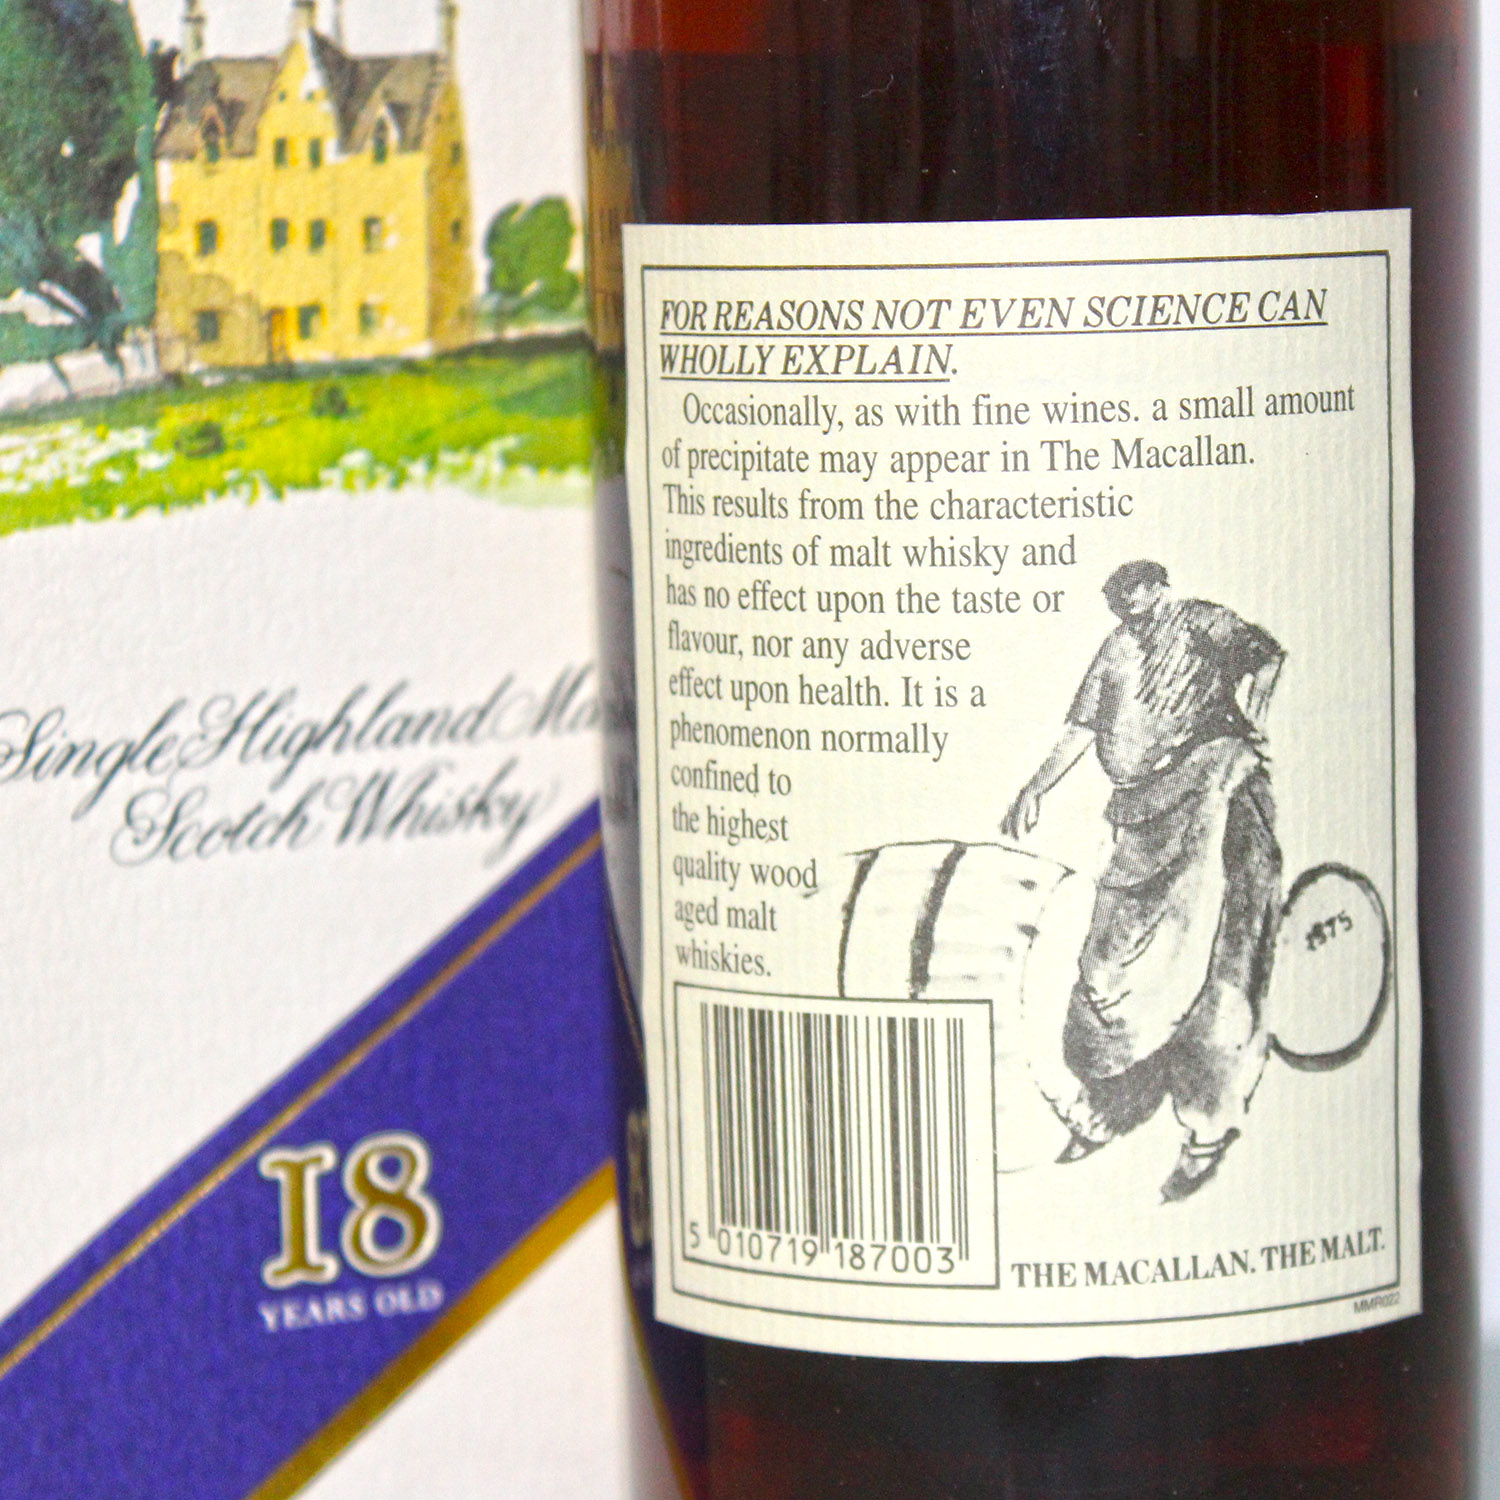 Macallan 1979 18 Years Old back label